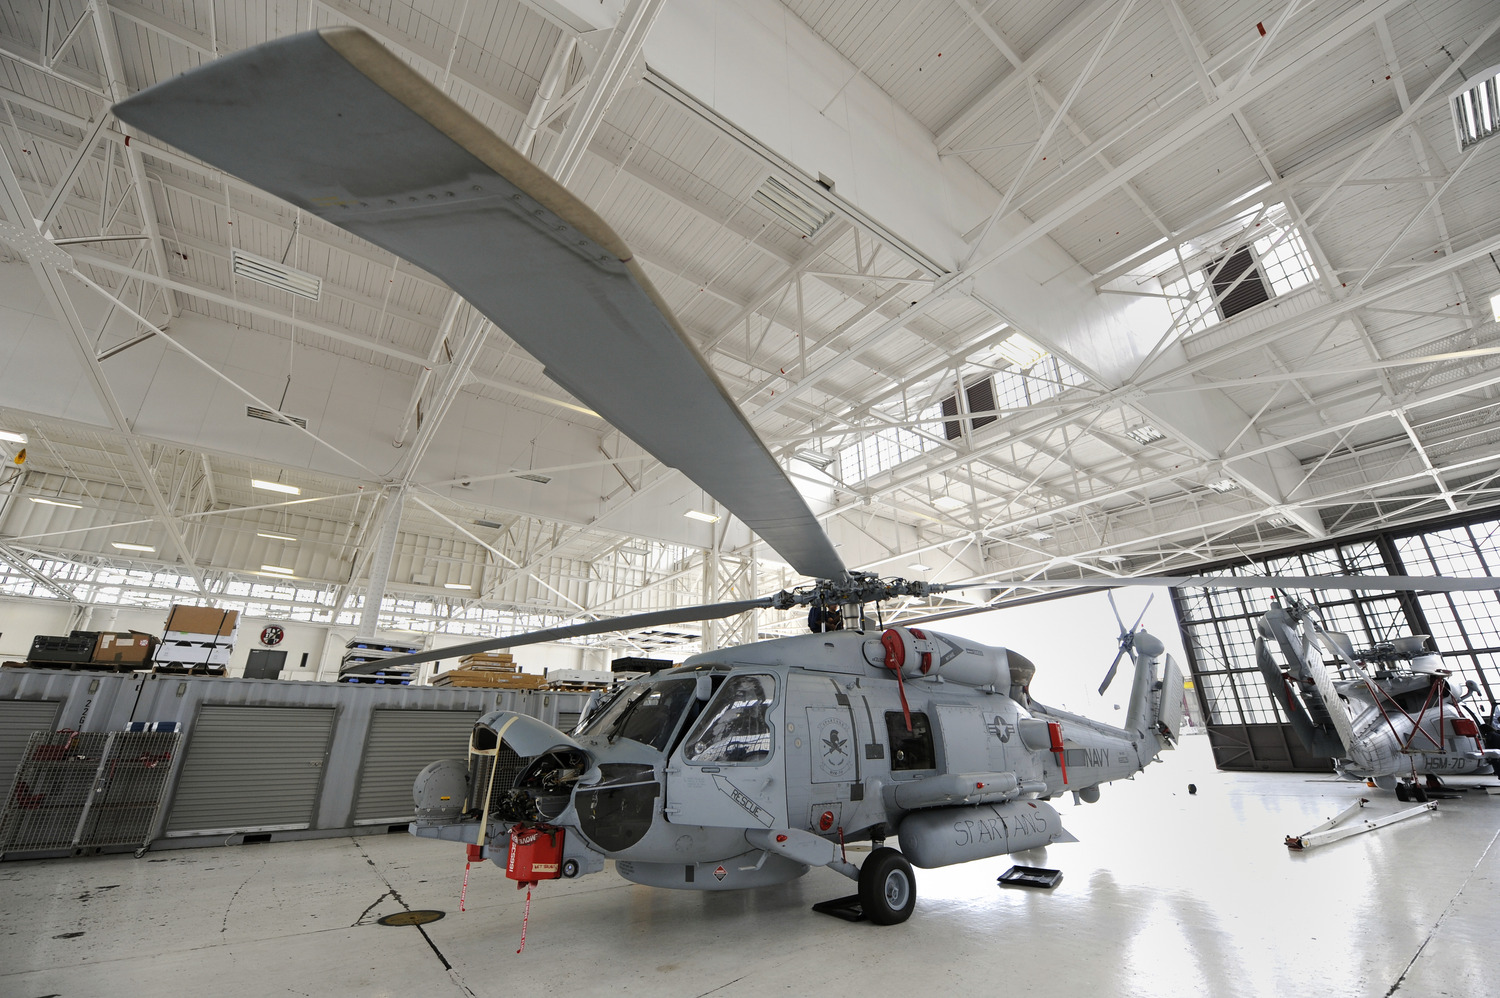 090608-N-0413R-022 
JACKSONVILLE, Fla. (June 8, 2009) A multi-mission MH-60R Sea Hawk helicopter assigned to the Spartans of Helicopter Maritime Strike Squadron (HSM) 70, undergoes maintenance in the hangar bay at Naval Air Station Jacksonville, Fla. (U.S. Navy photo by Mass Communication Specialist 2nd Class Shannon Renfroe/Released)